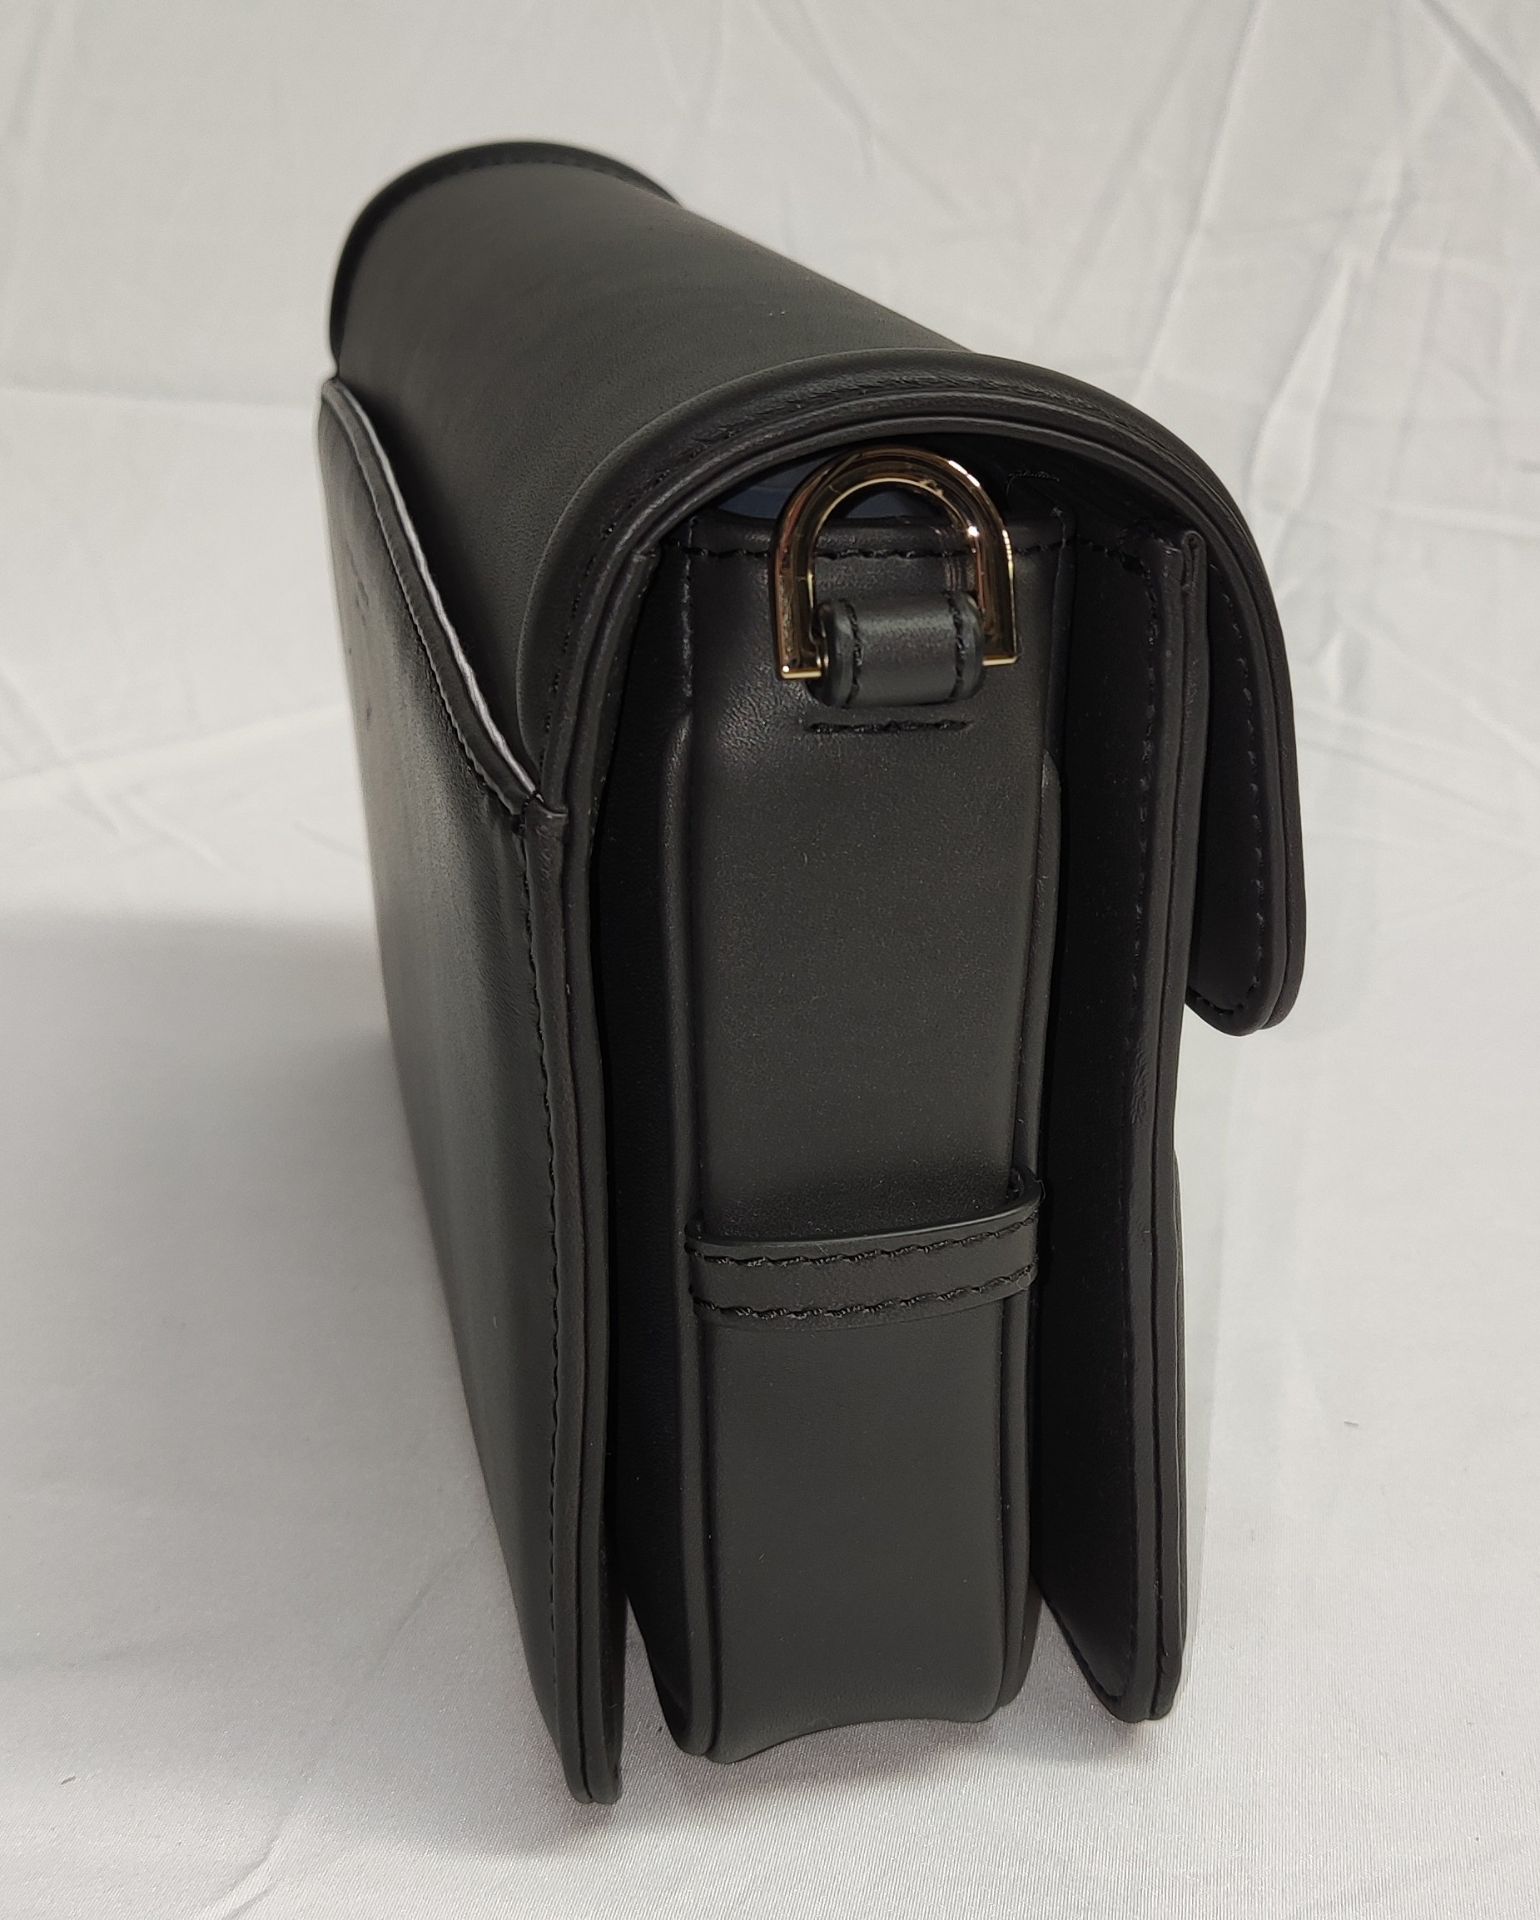 1 x ASPINAL OF LONDON The Resort Leather Bag In Smooth Black - Boxed - Original RRP £525 - Ref: - Image 19 of 24